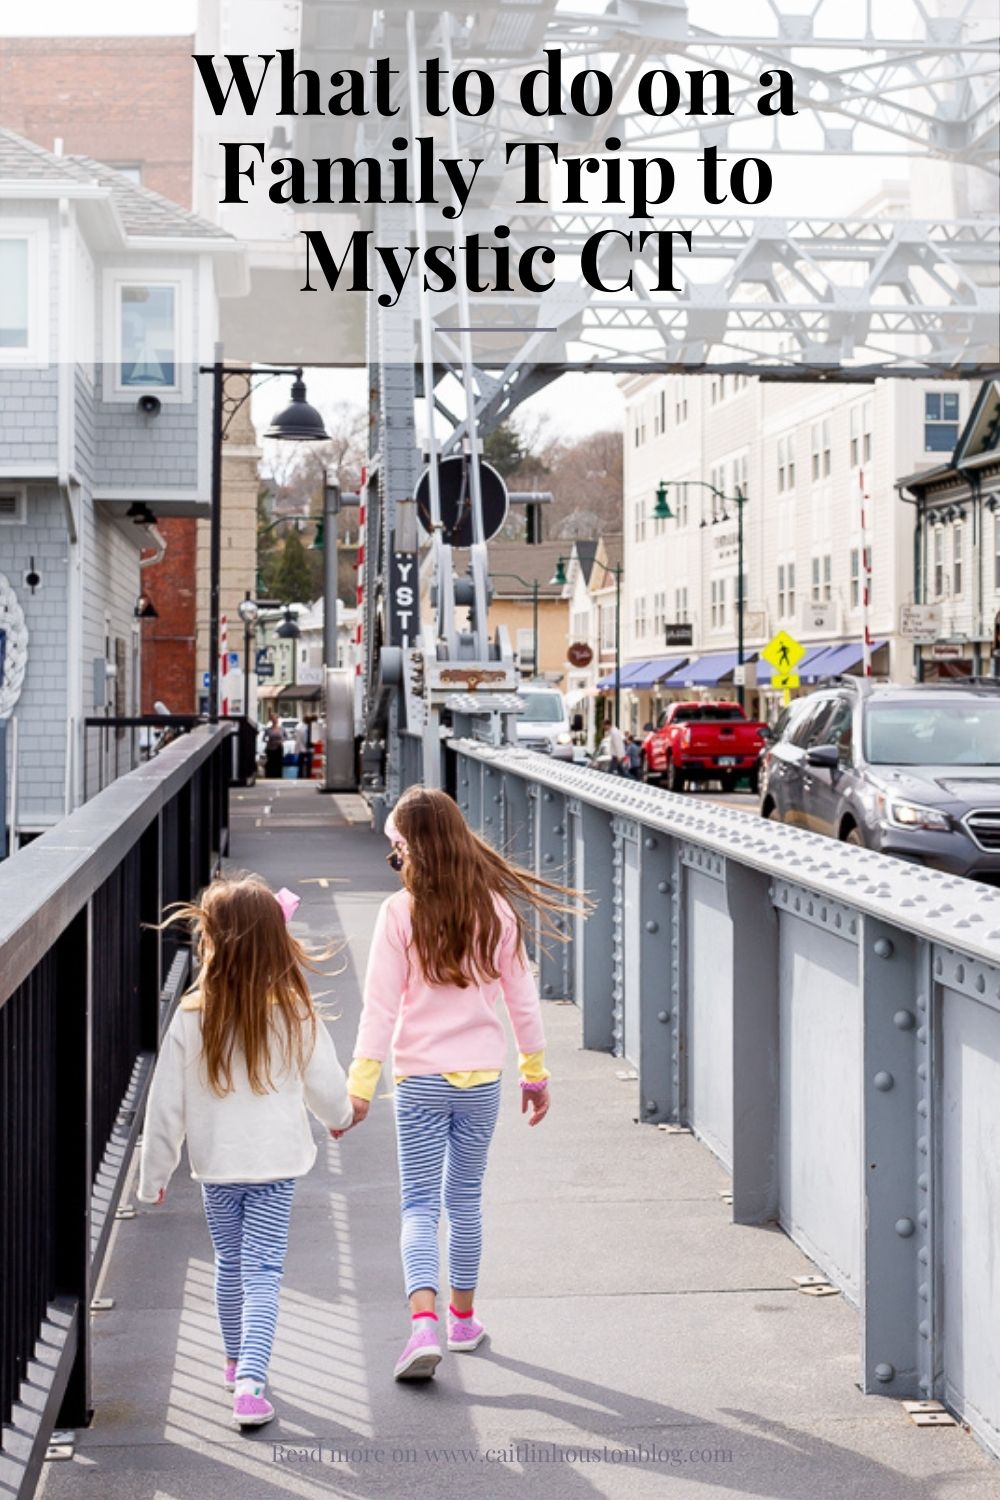 What to do on a Family trip to Mystic CT